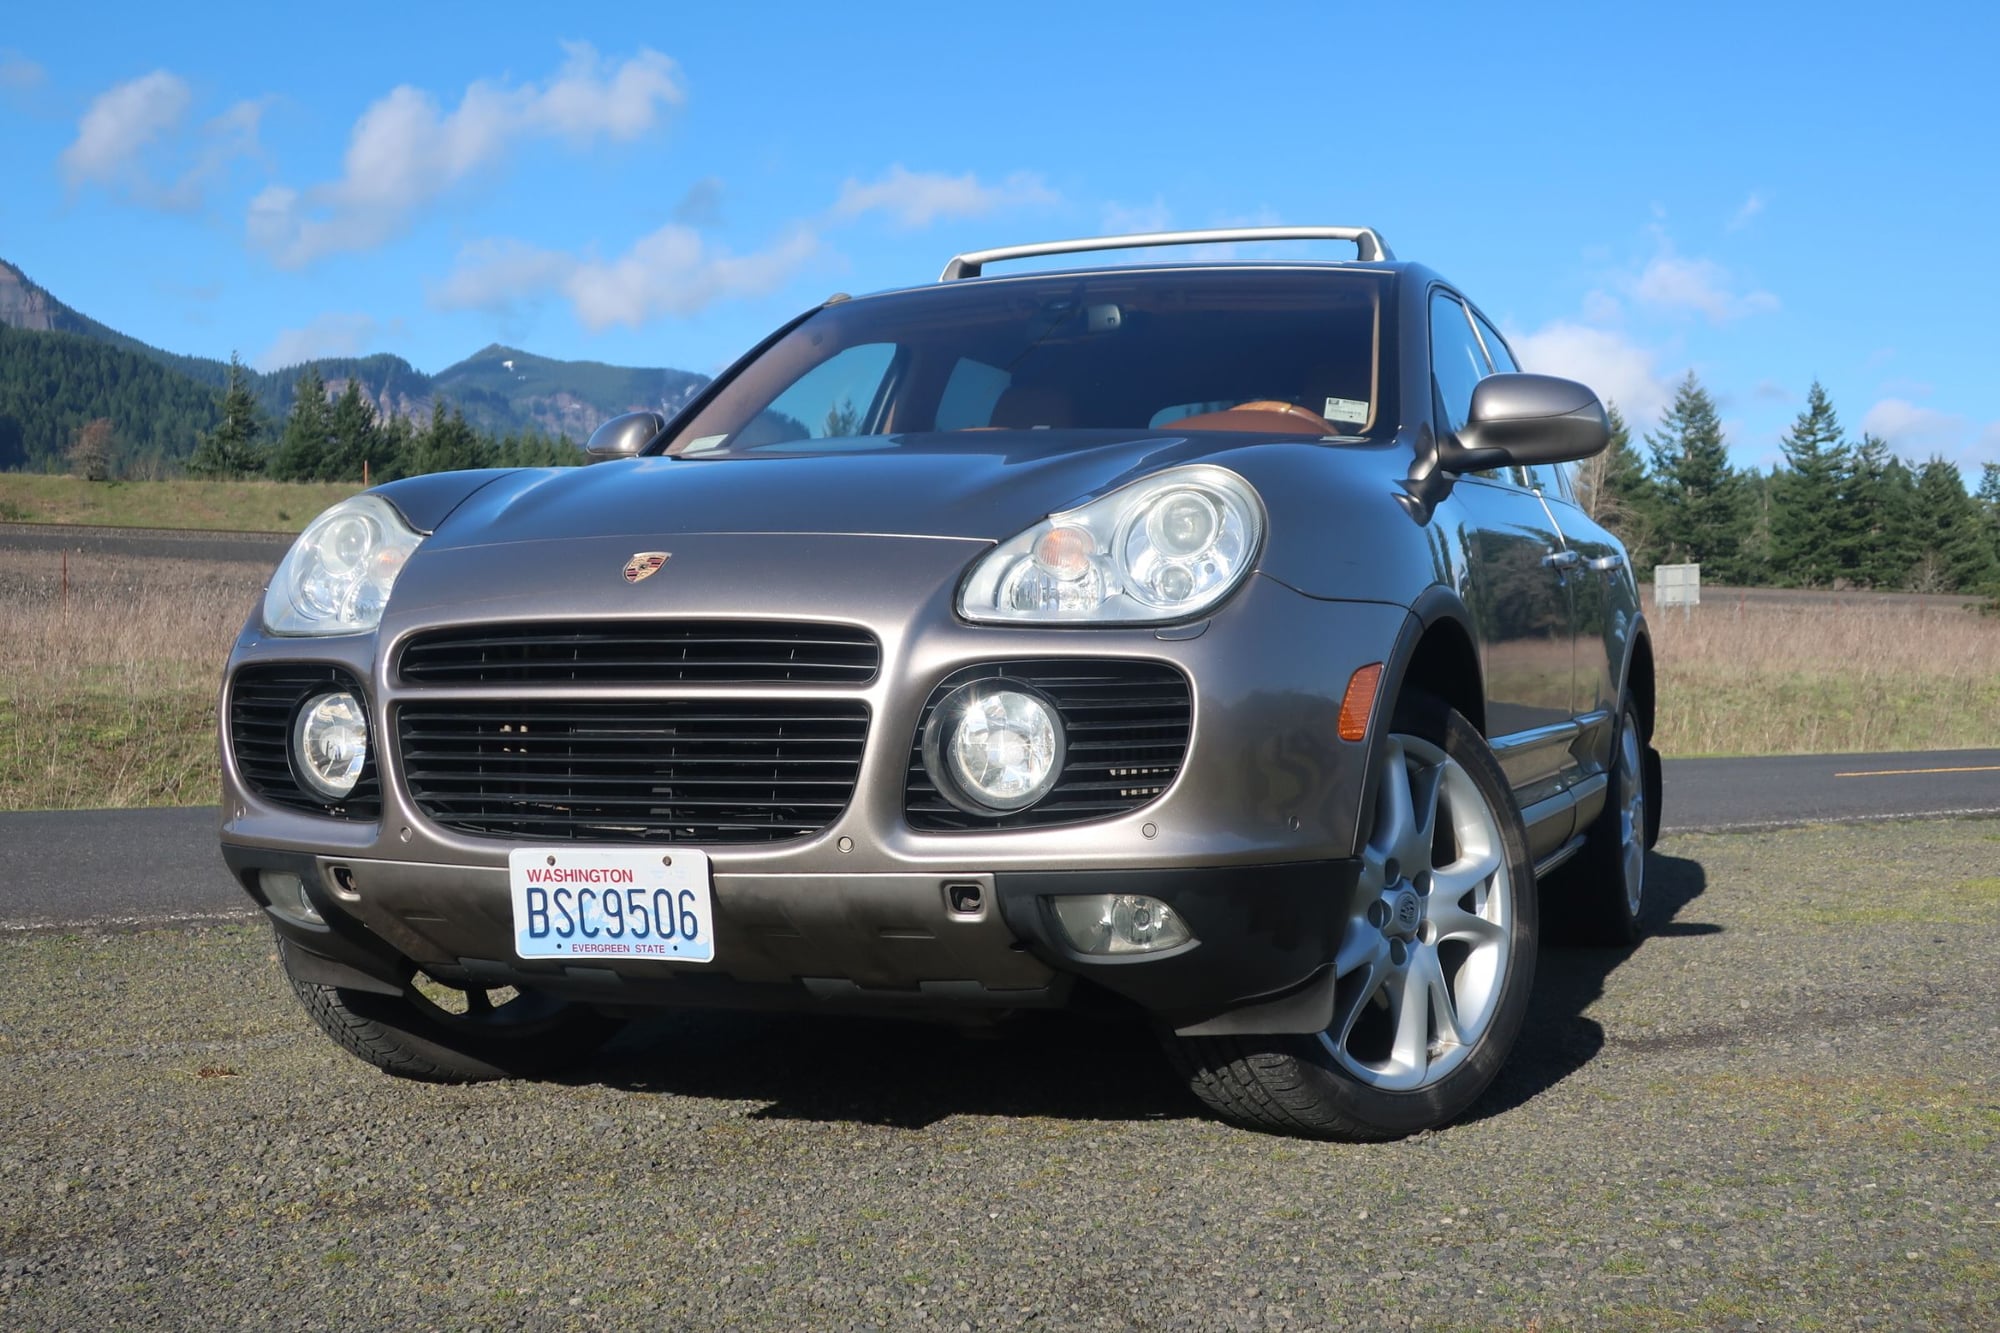 2004 Porsche Cayenne - '04 Cayenne Turbo, a few issues - Used - VIN WP1AC29P54LA92748 - 140,500 Miles - 8 cyl - 4WD - Automatic - SUV - Gold - Washougal, WA 98671, United States